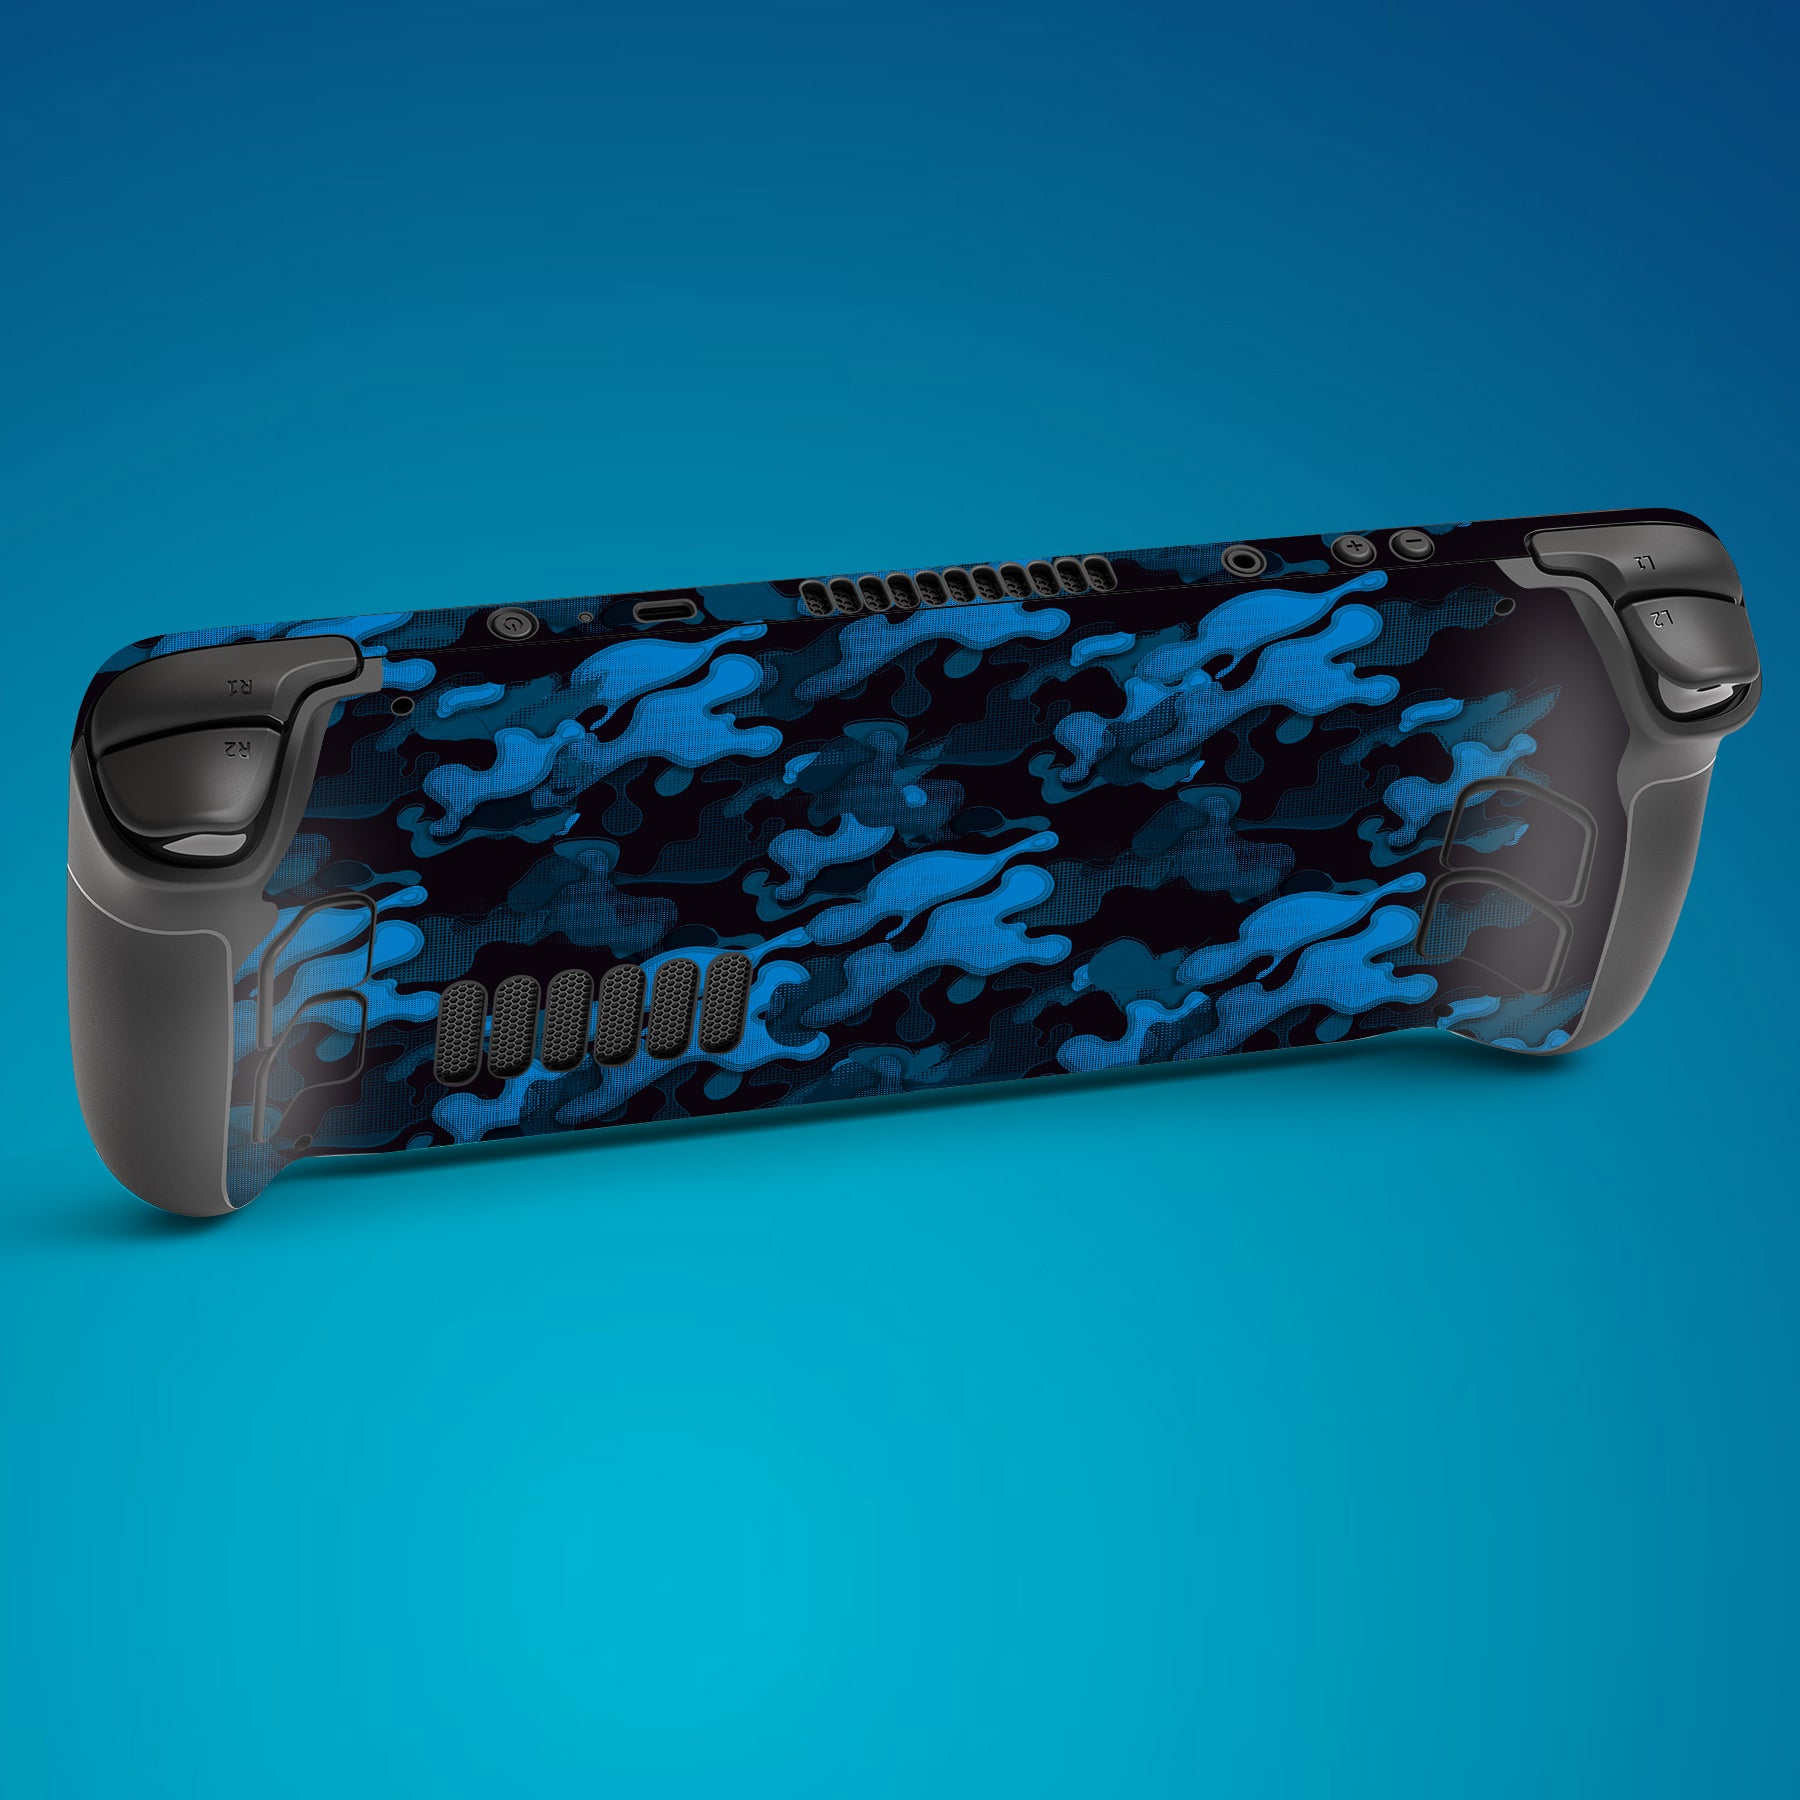 PlayVital Full Set Protective Skin Decal for Steam Deck, Custom Stickers Vinyl Cover for Steam Deck Handheld Gaming PC - Black Blue Camouflage - SDTM013 playvital